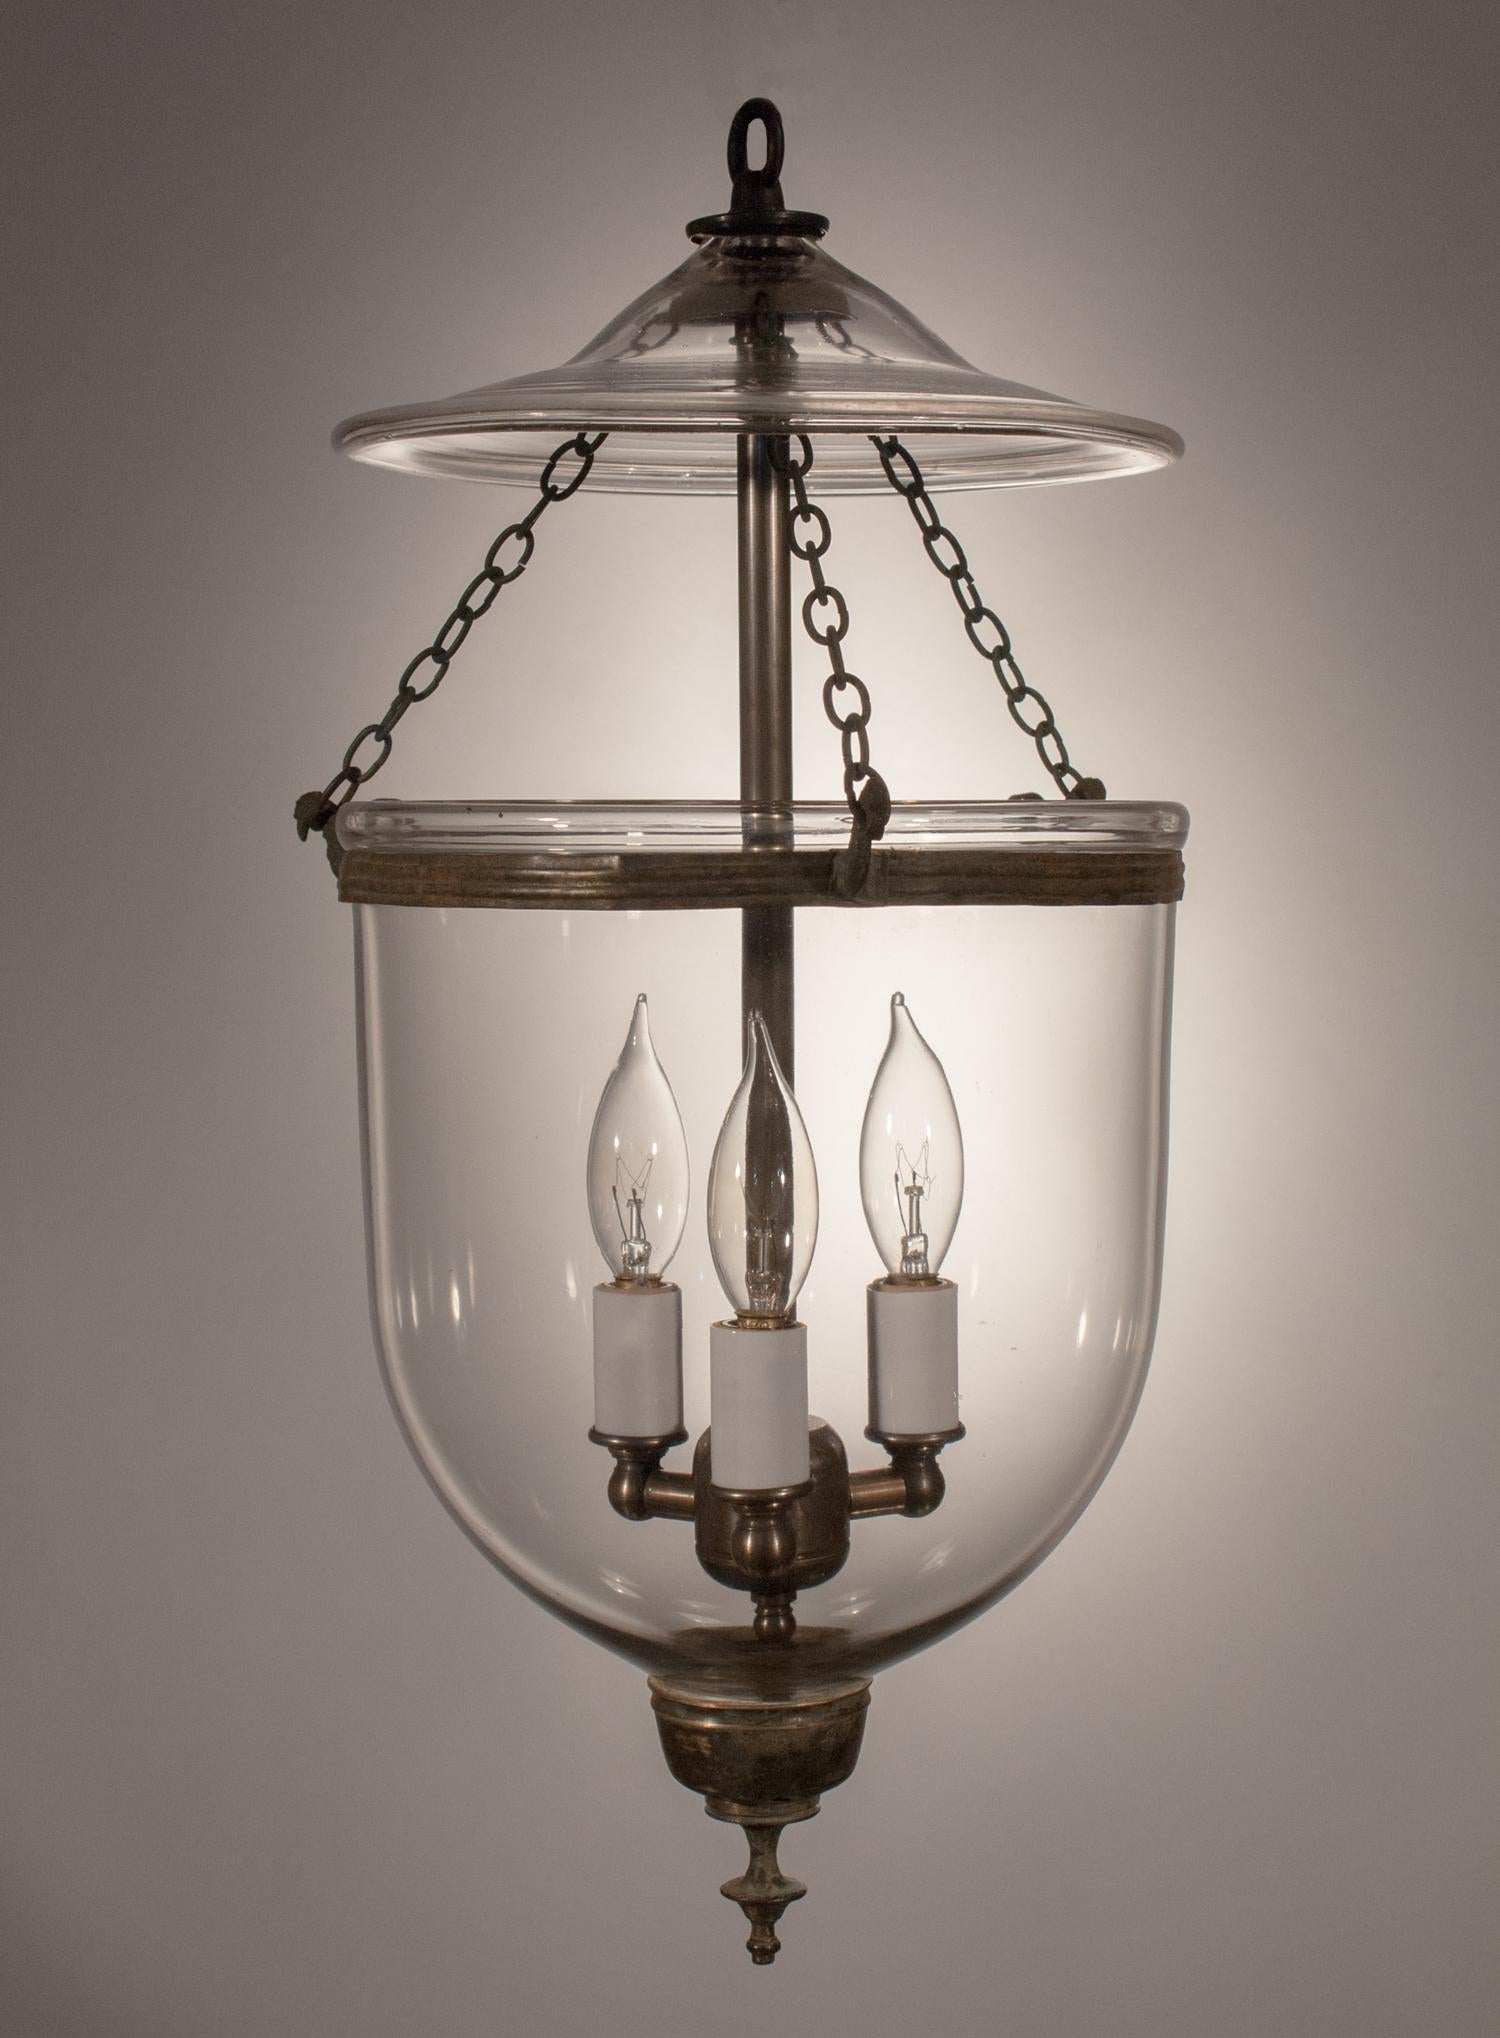 A lovely bell jar lantern with its original chain, rolled brass band and finial candleholder base. This petite hall lantern features excellent quality handblown glass. It has been newly electrified with a three-bulb candelabra cluster accommodating